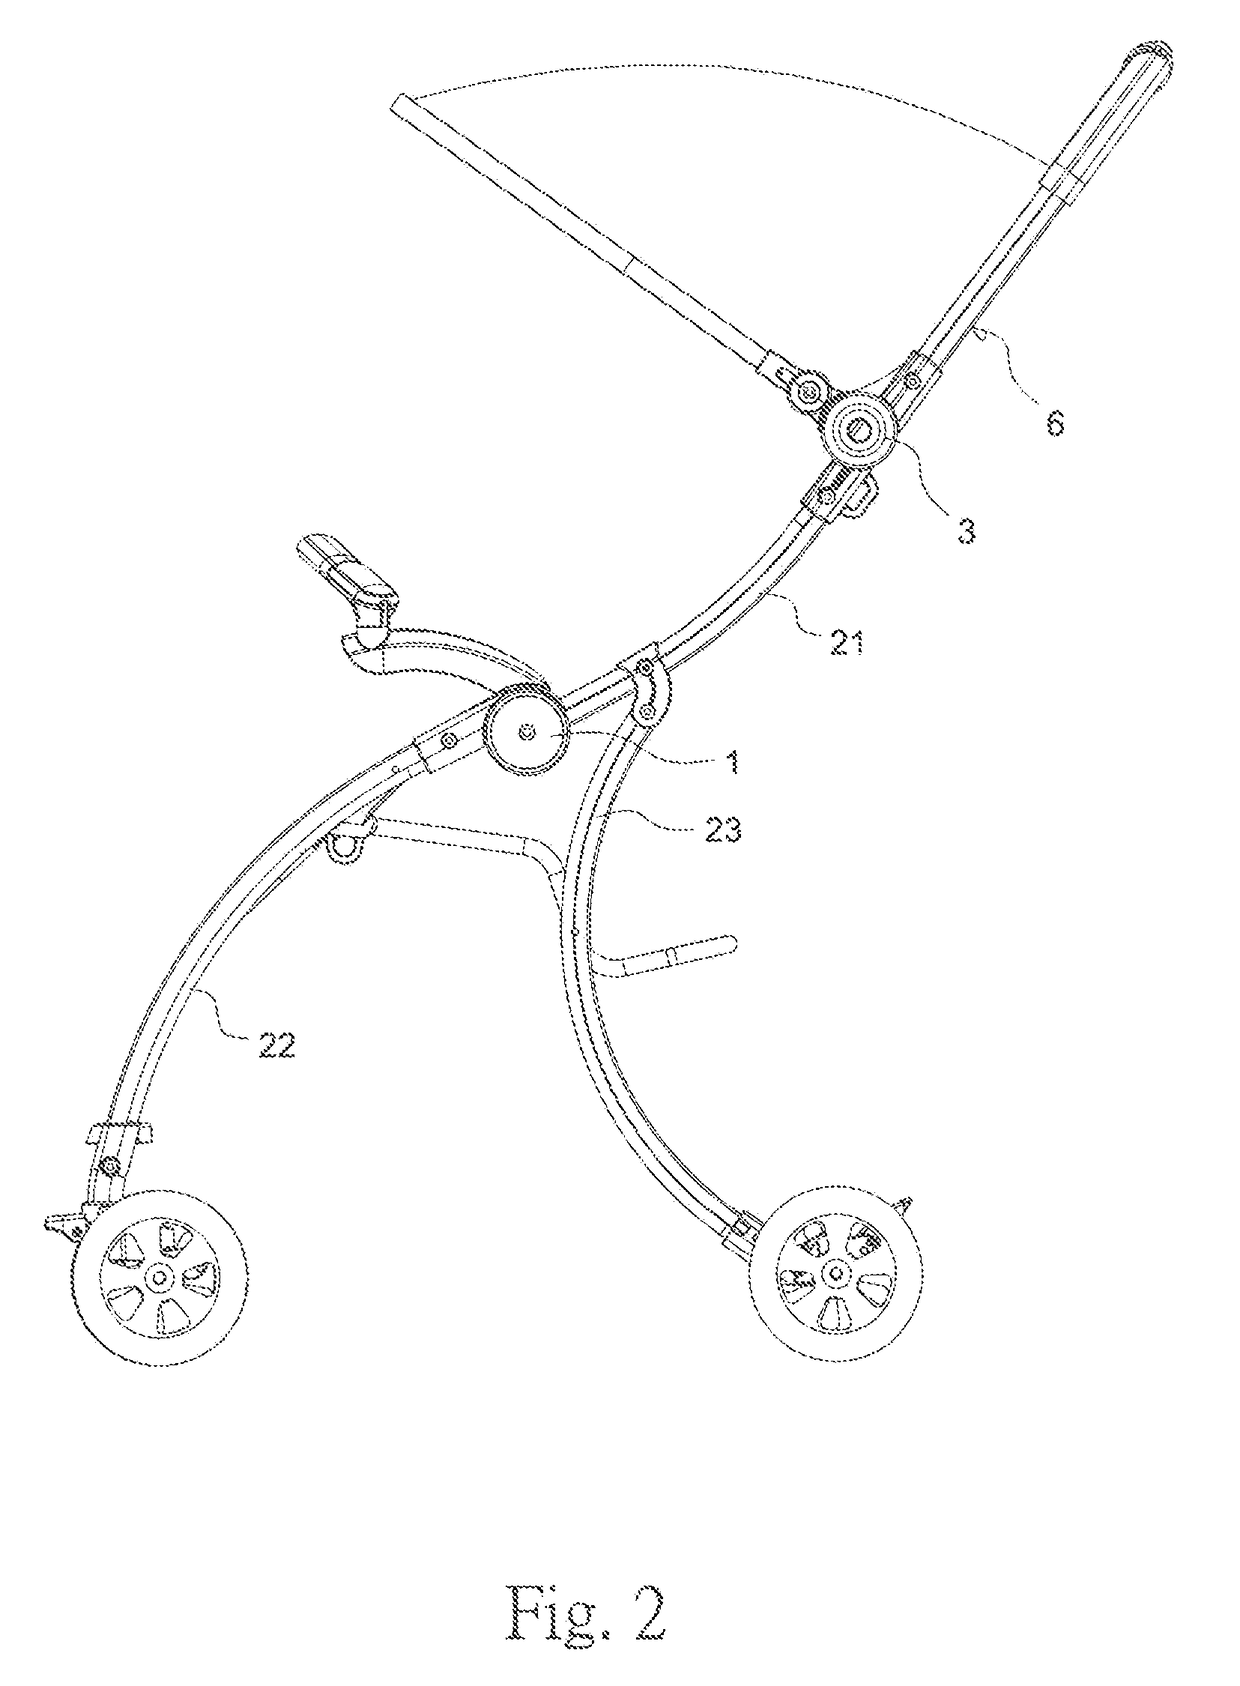 Interlocking folding component and method thereof for strollers